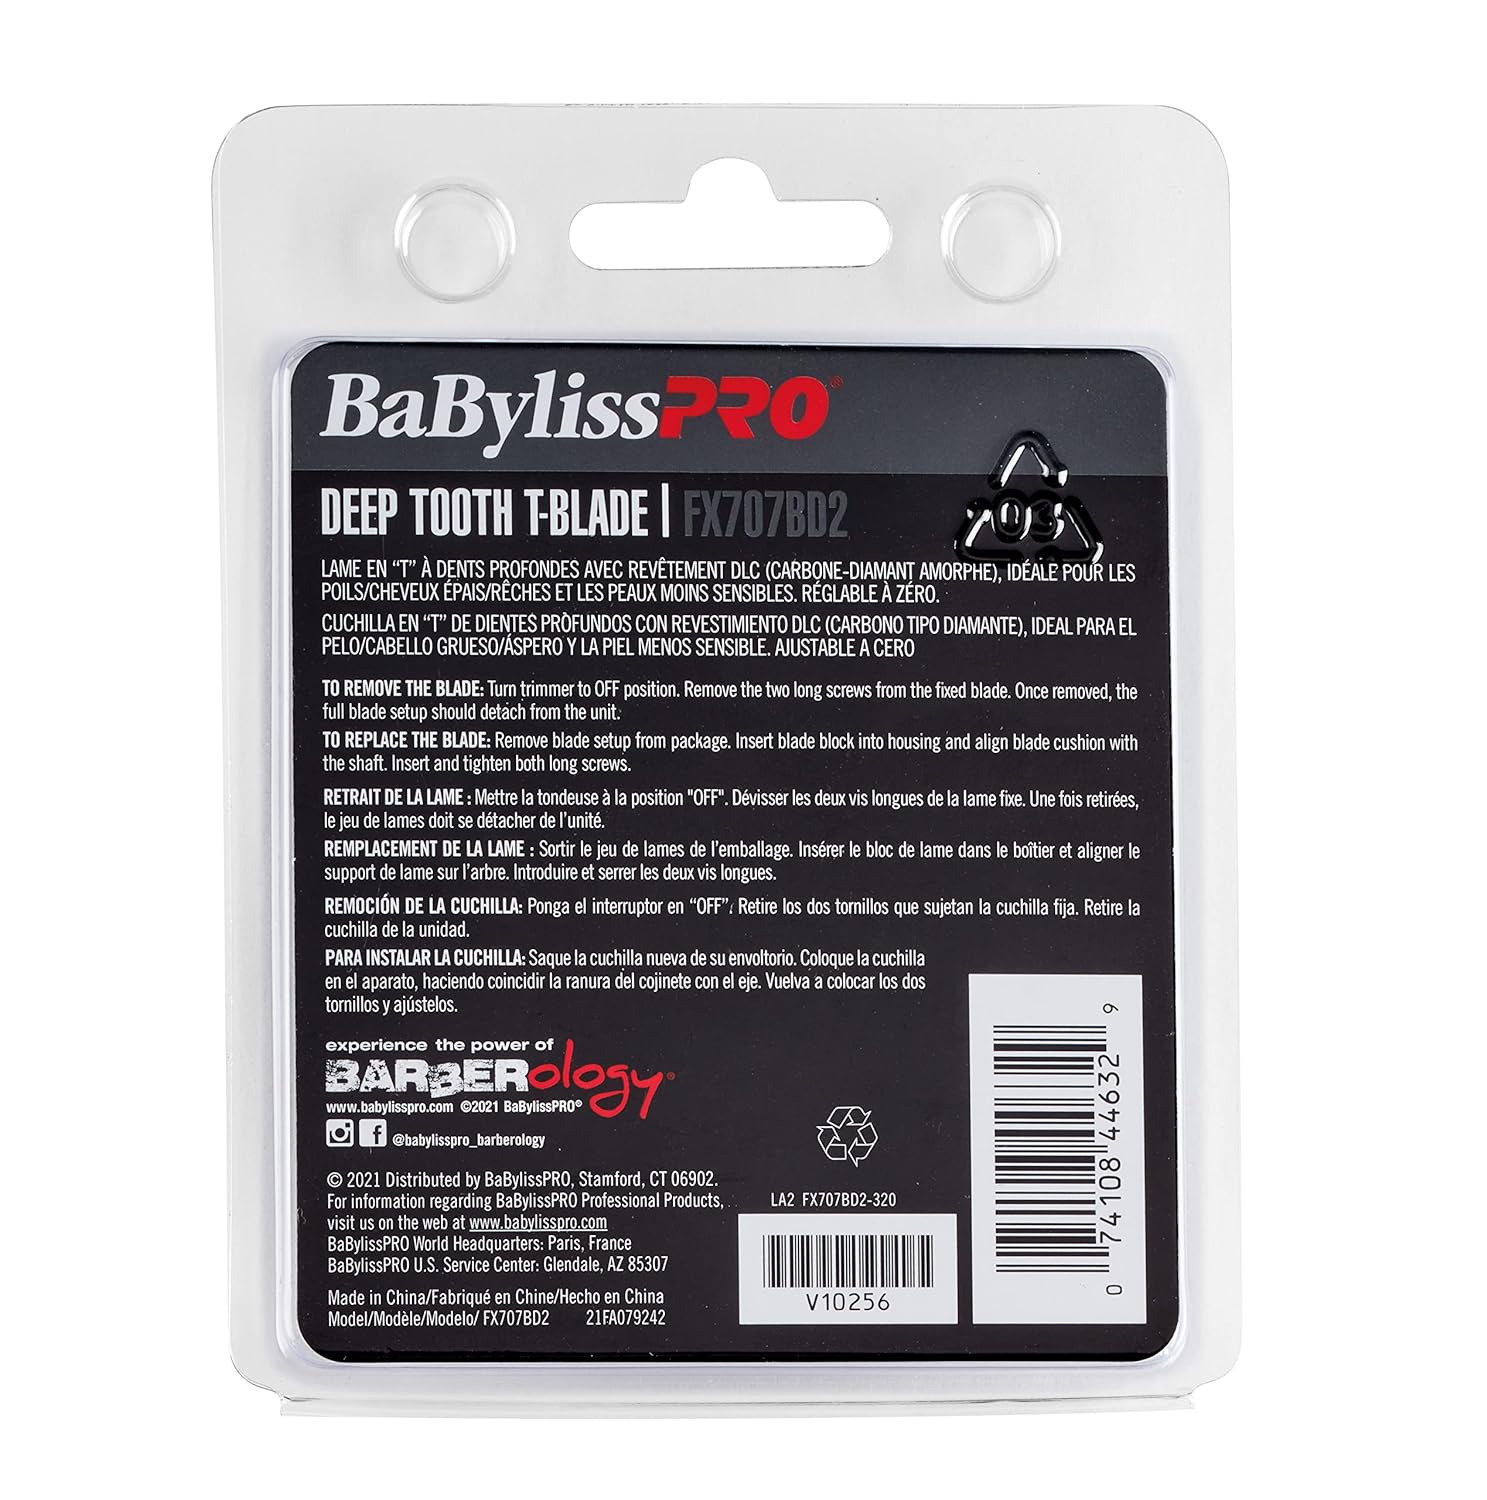 Babbyliss Deep Tooth T-Blade FX707DB2 Back Packaging